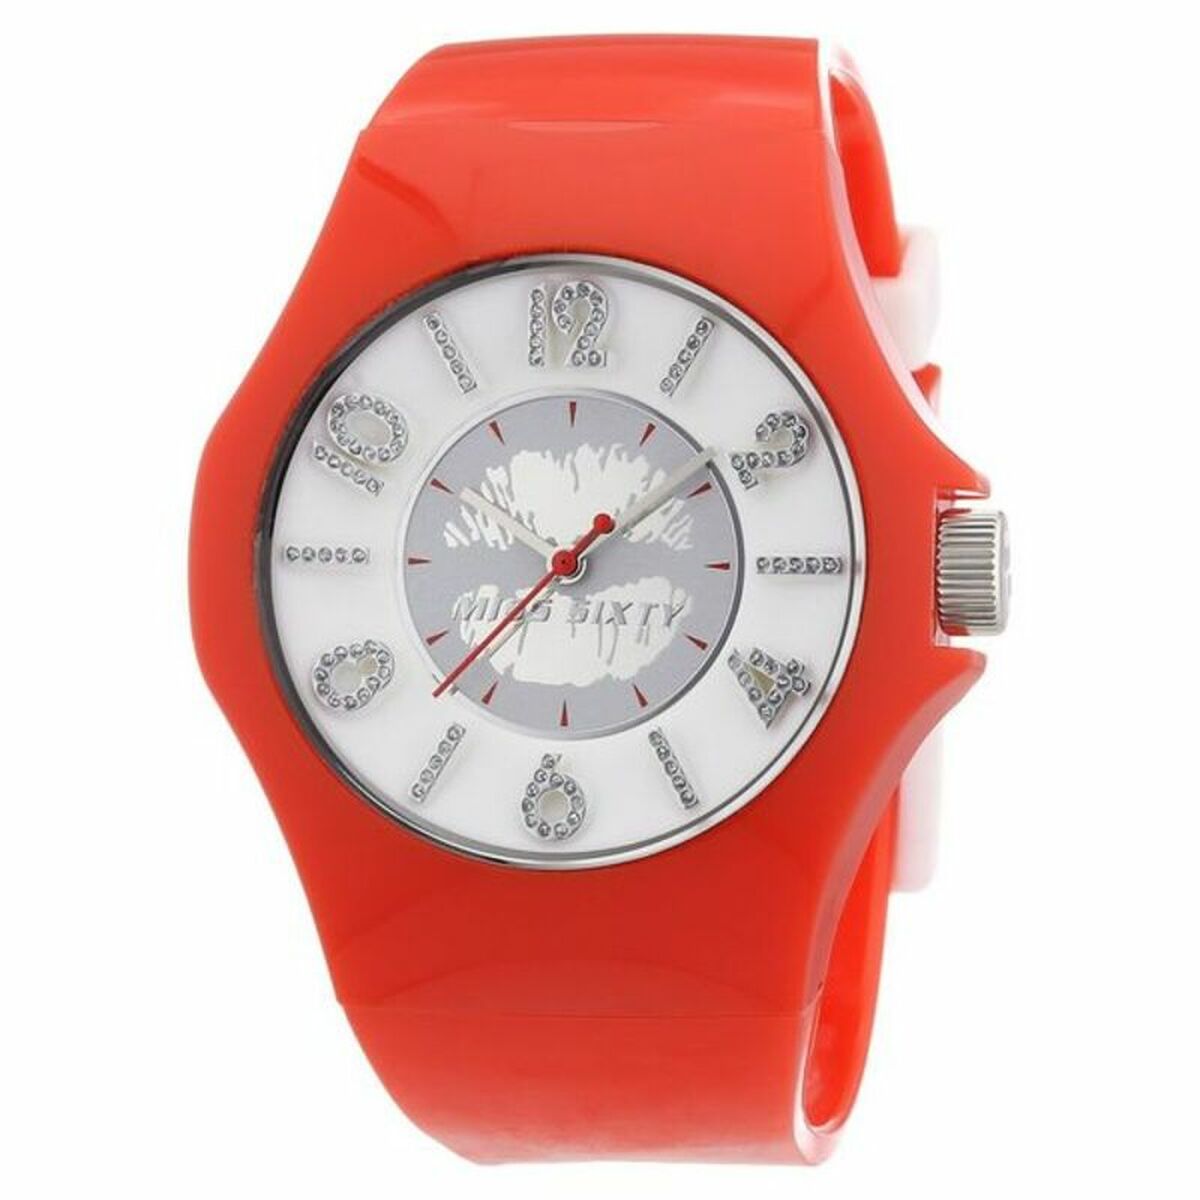 Ladies'Watch Miss Sixty R0751124503 (Ø 40 mm), Miss Sixty, Watches, Women, ladieswatch-miss-sixty-r0751124503-o-40-mm, : Quartz Movement, :Red, Brand_Miss Sixty, category-reference-2570, category-reference-2635, category-reference-2995, category-reference-t-19667, category-reference-t-19725, Condition_NEW, fashion, gifts for women, original gifts, Price_20 - 50, RiotNook